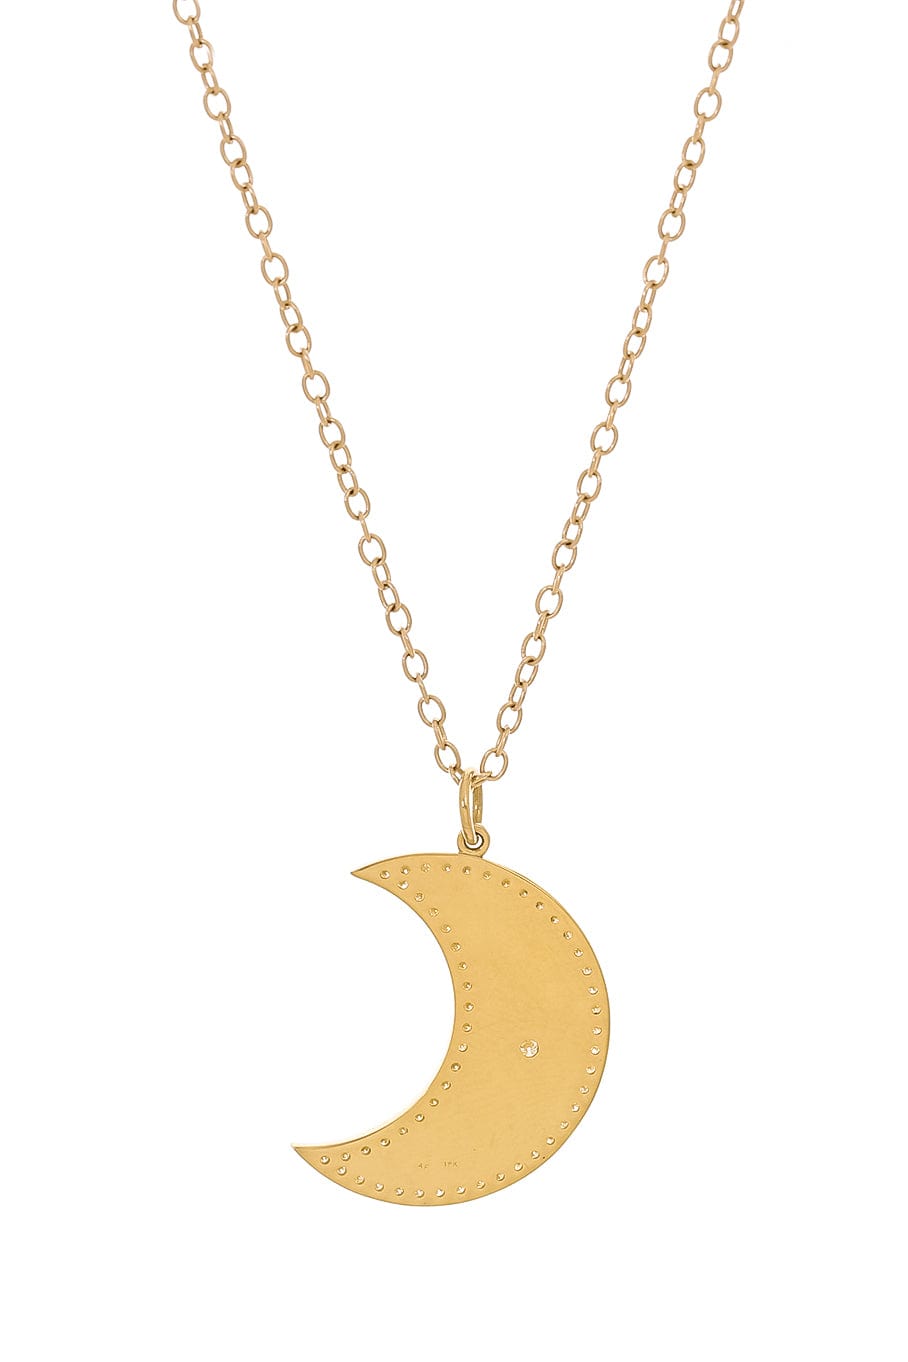 ANDREA FOHRMAN-Large Peacock Crescent Moon Necklace-YELLOW GOLD